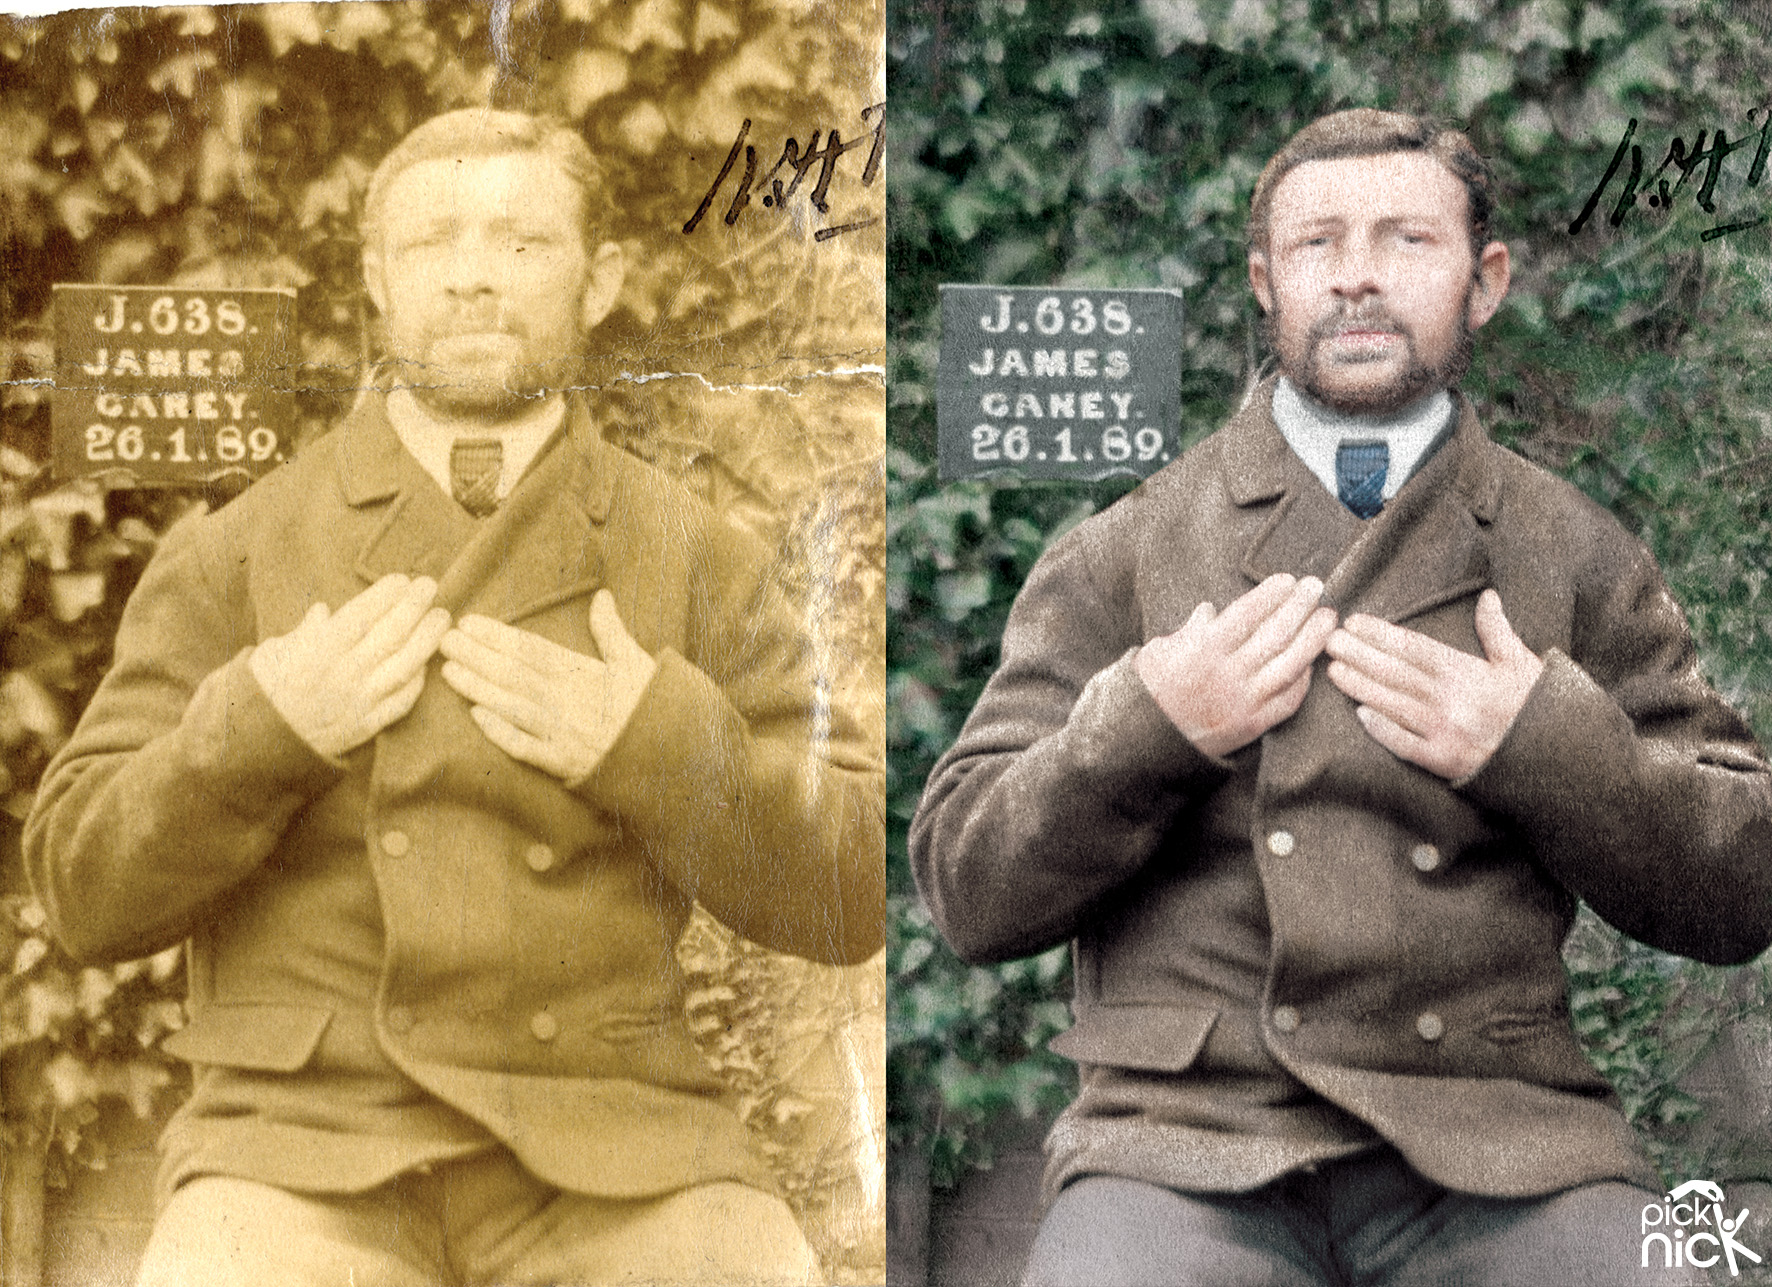 James Carey - Colourised prisoner photos showing before and after